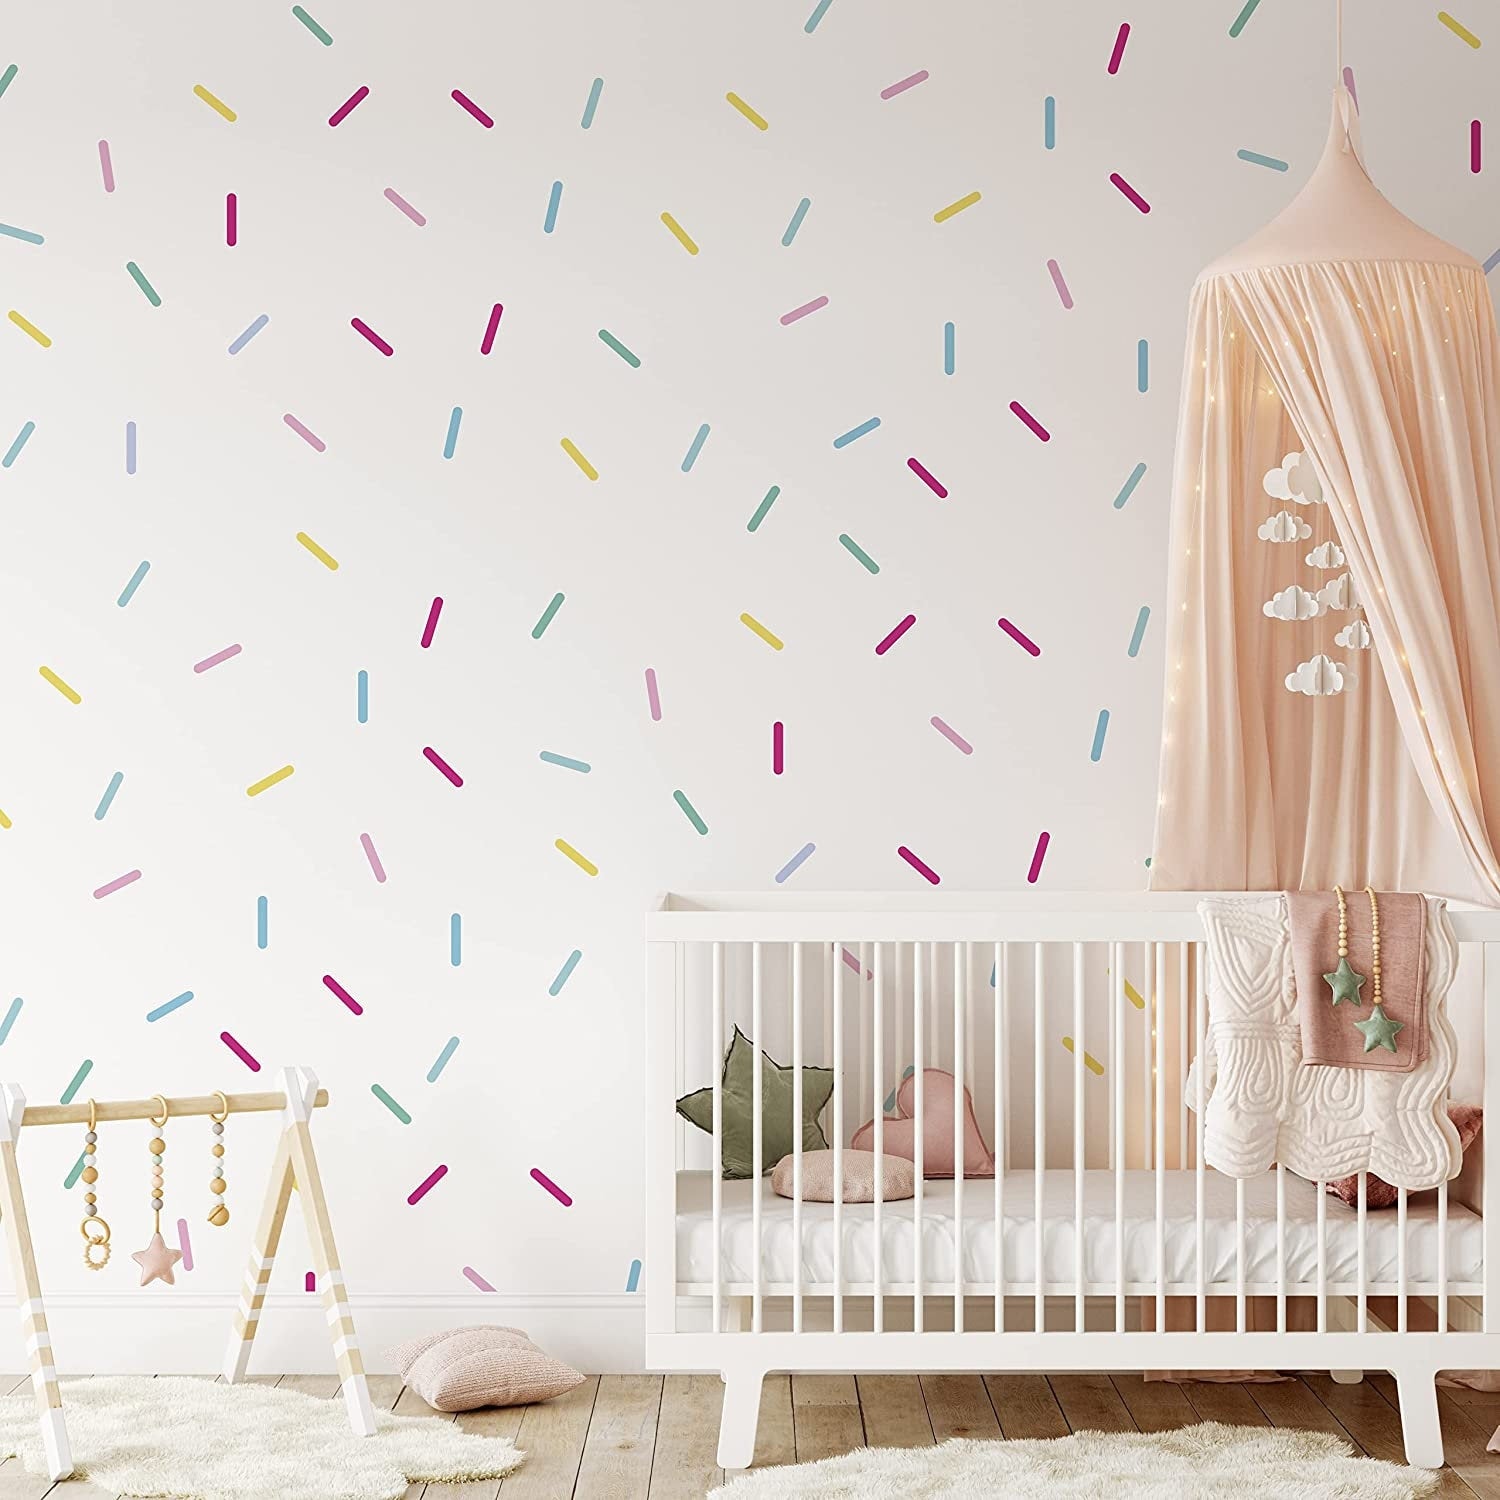 Colour Sprinkles Wall Stickers For Kids Room, Sprinkle Wall Stickers, Sprinkle Wall Decals For Children's Bedrooms Nursery Playroom Confetti